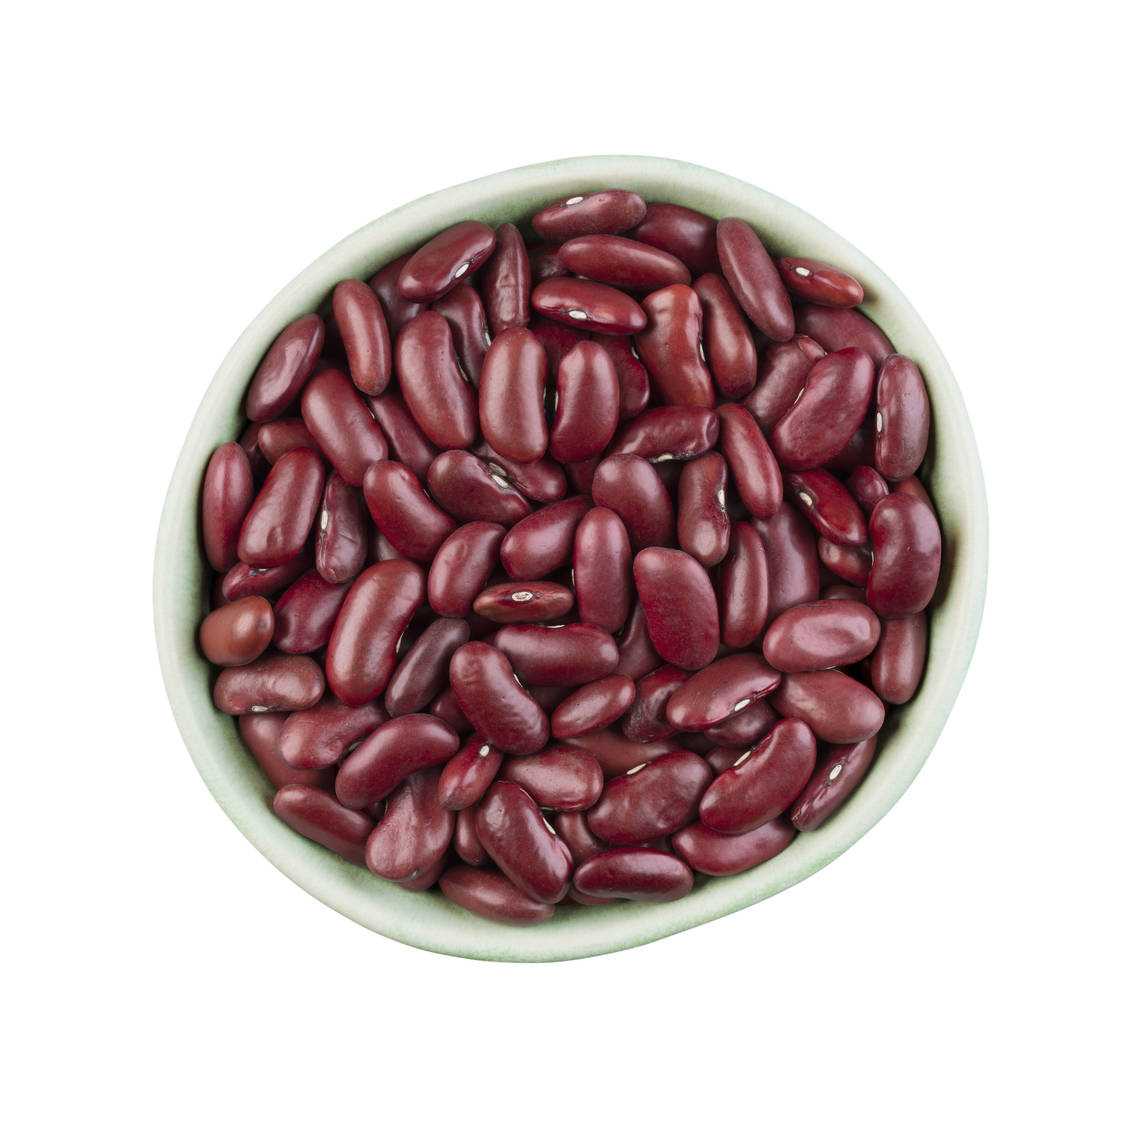 Dark red kidney beans are essential in chilli-con-care but are also used in Mexican soups and Carribean and Inidian dishes.